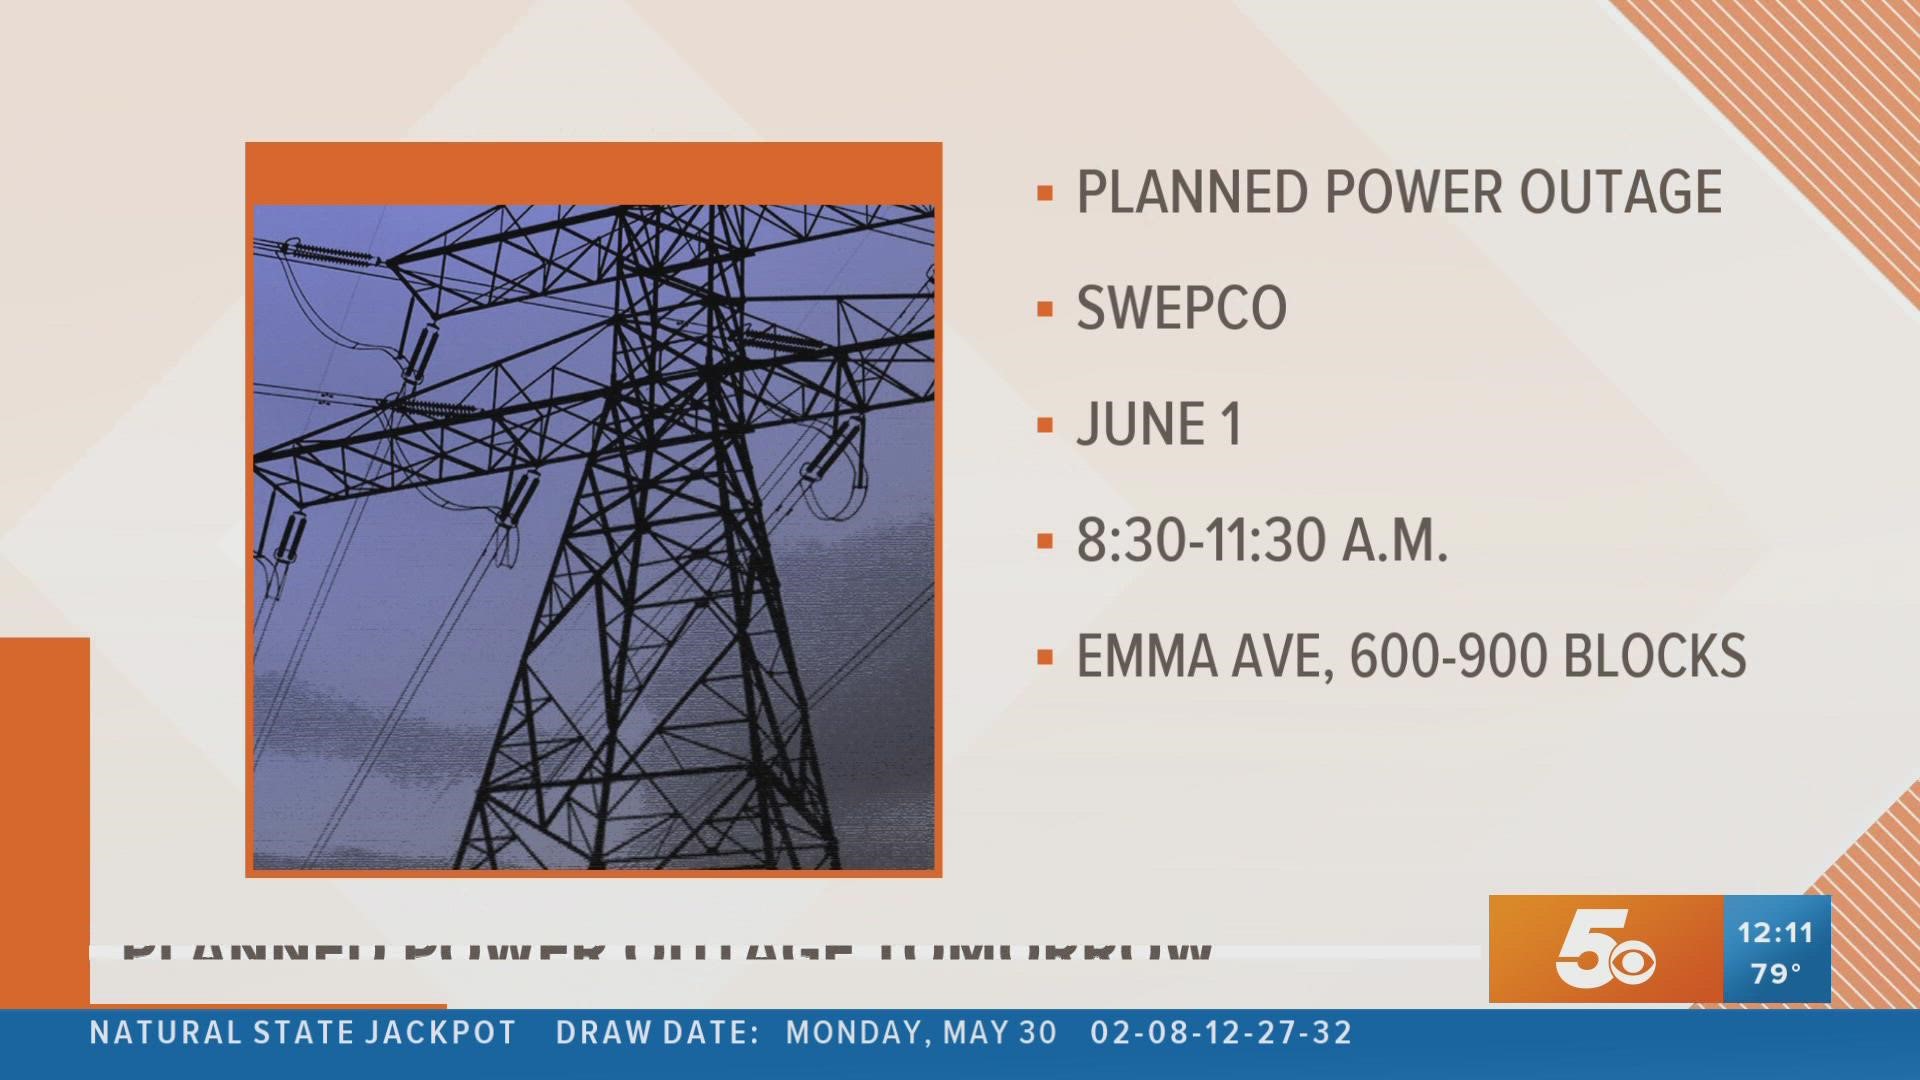 On Wednesday, June 1, SWEPCO has a three-hour power outage planned from 8:30 a.m. to 11:30 a.m for the Springdale service area.